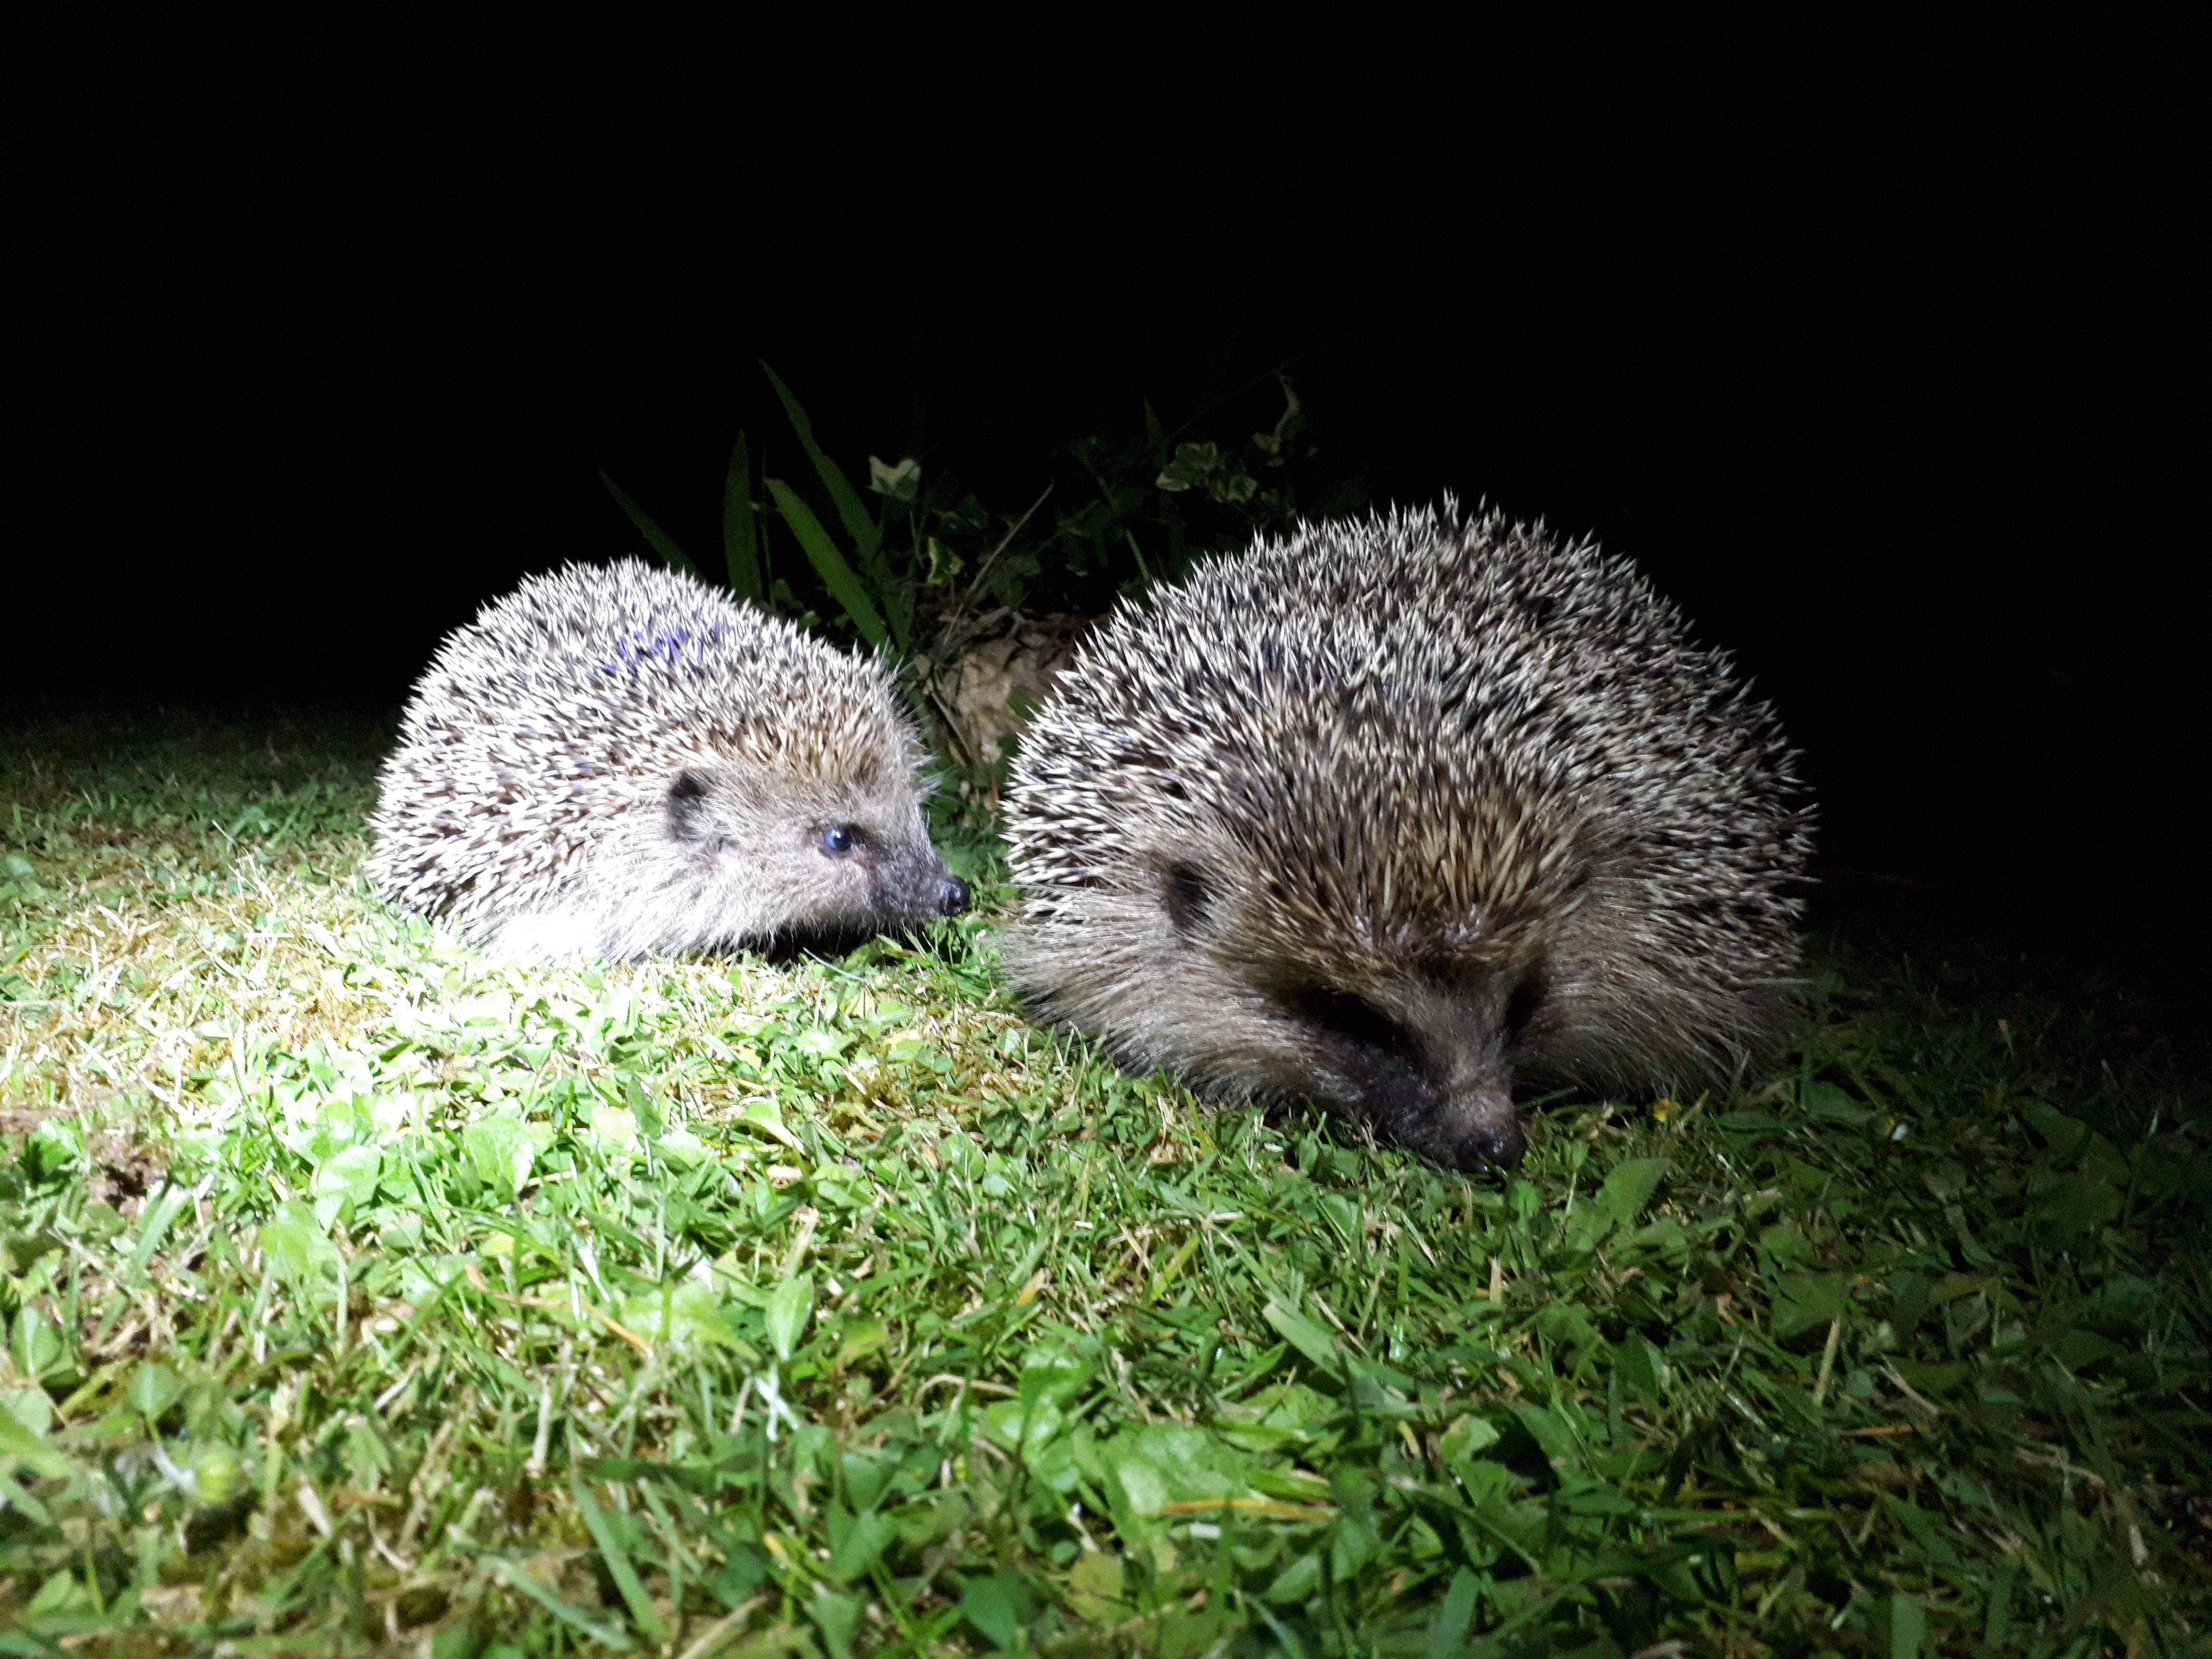 Explore guidance and tips on surveying hedgehogs